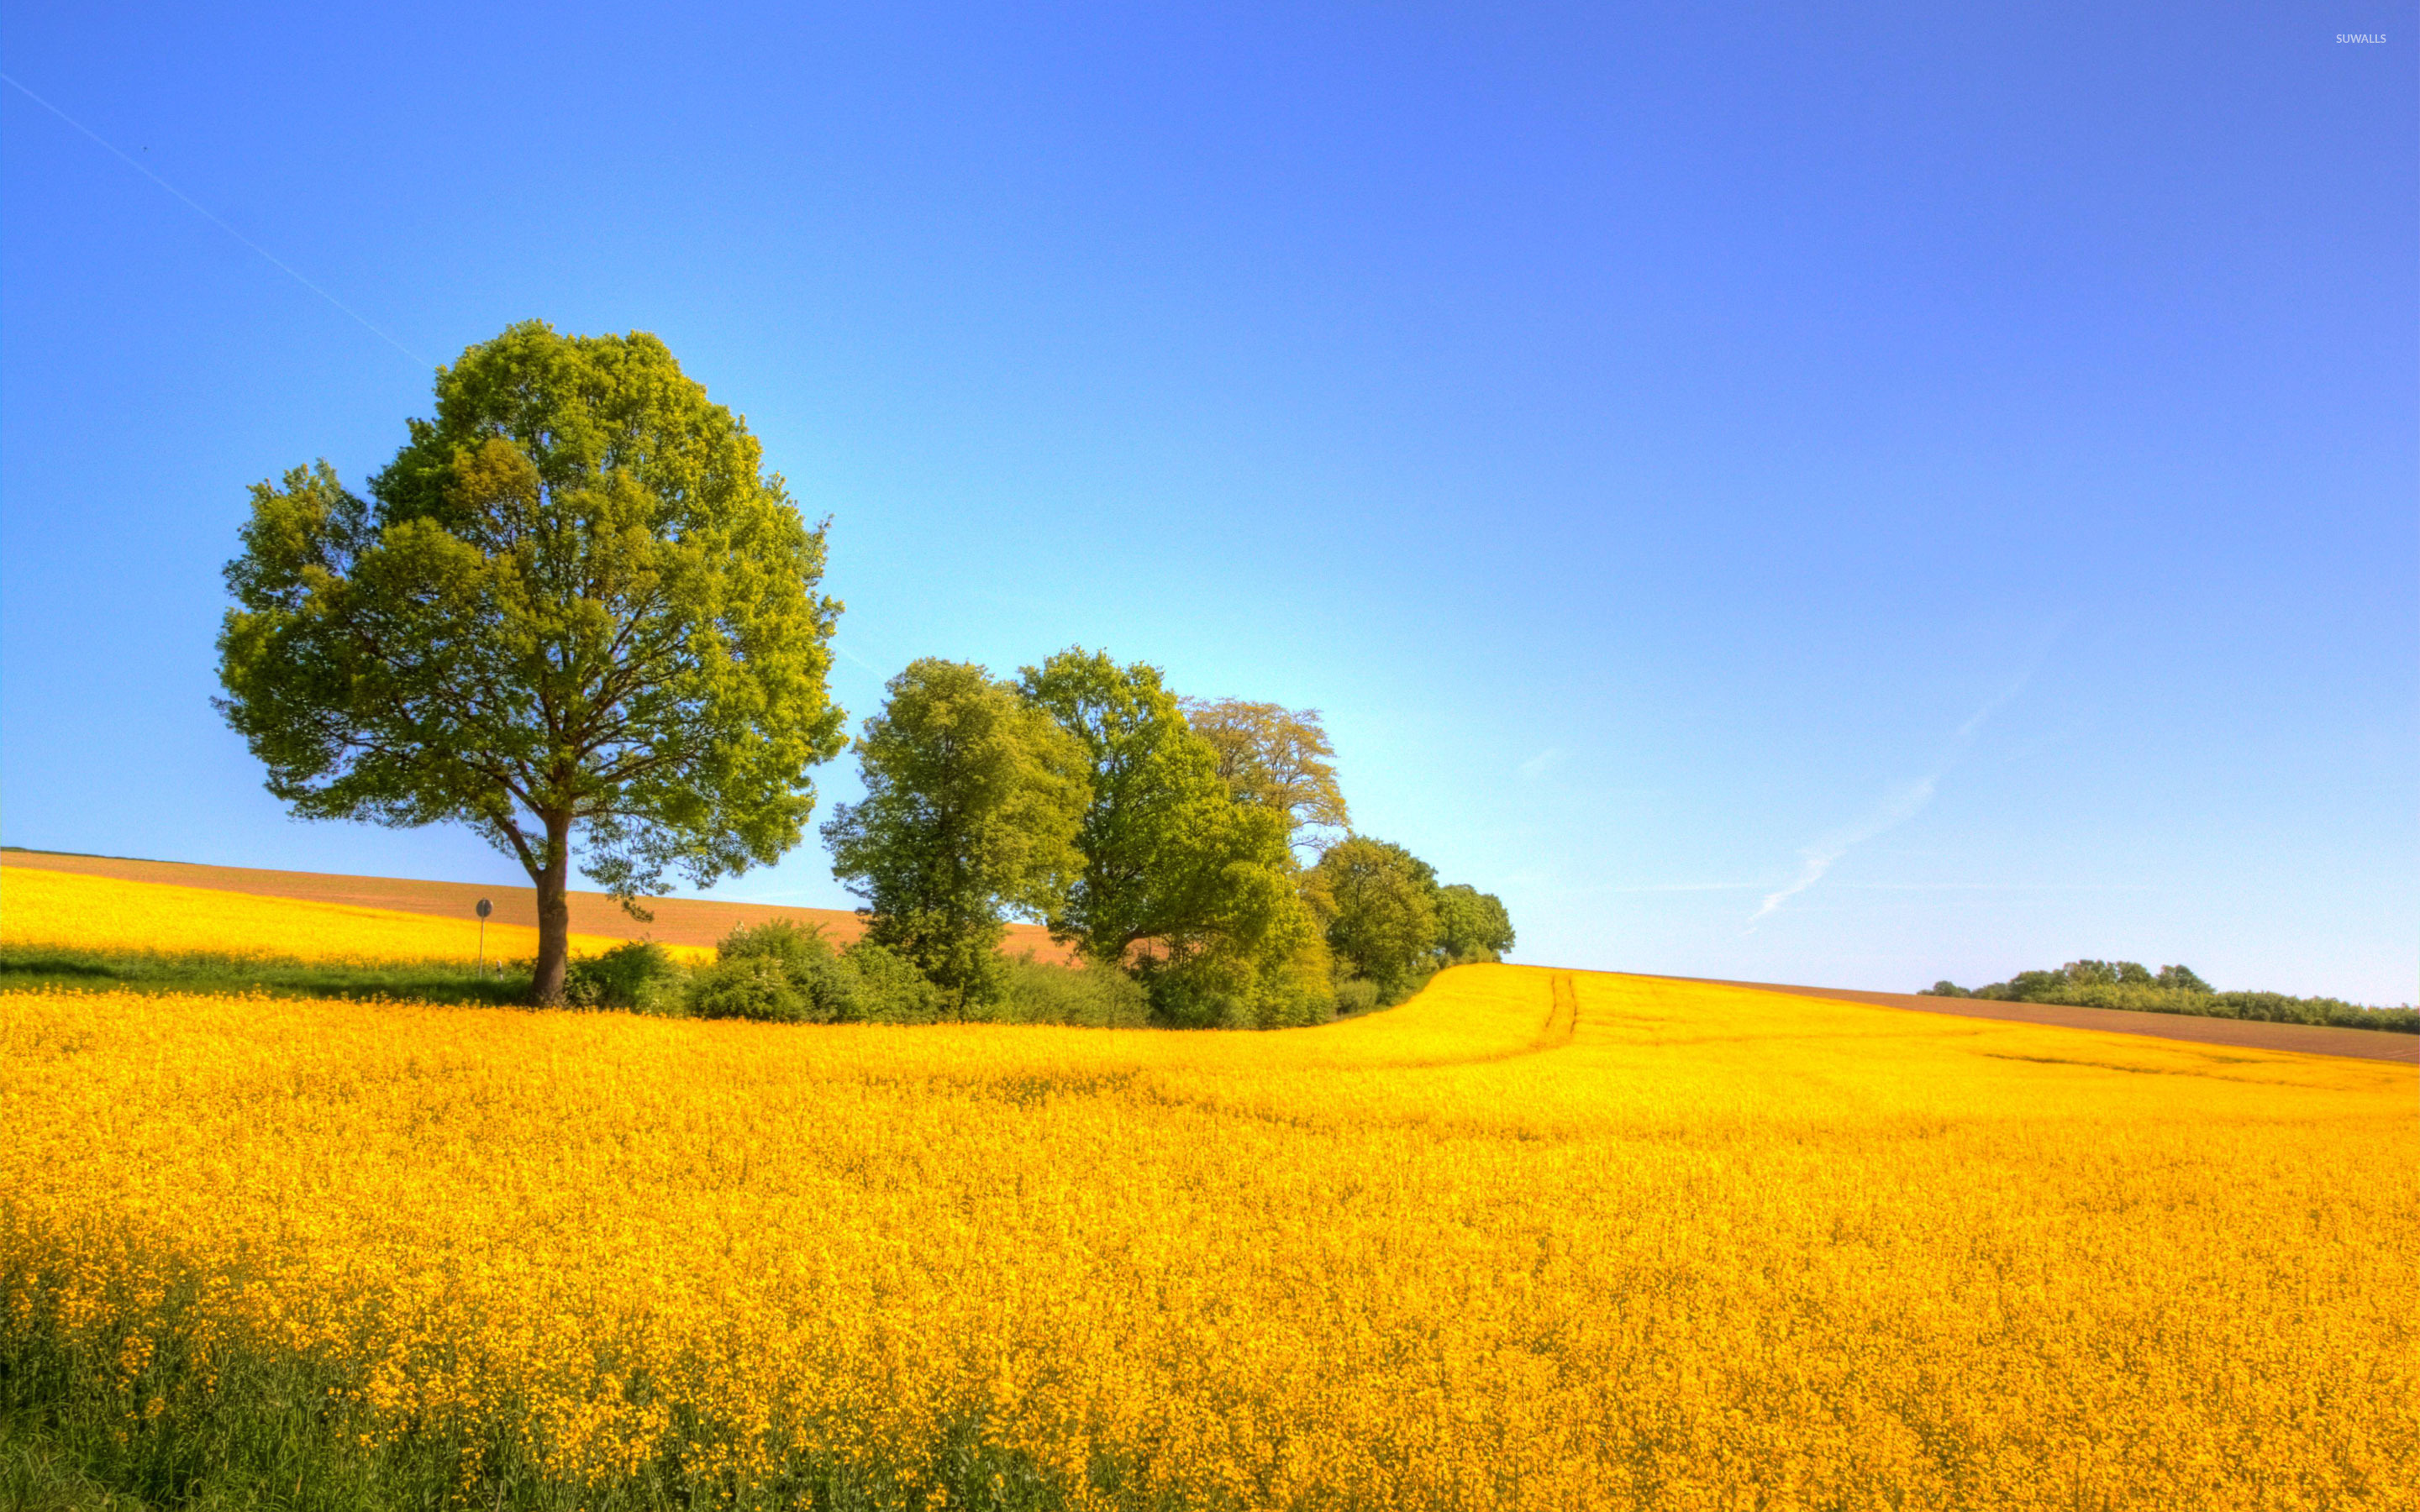 Yellow rapeseed field wallpaper - Nature wallpapers - #24532